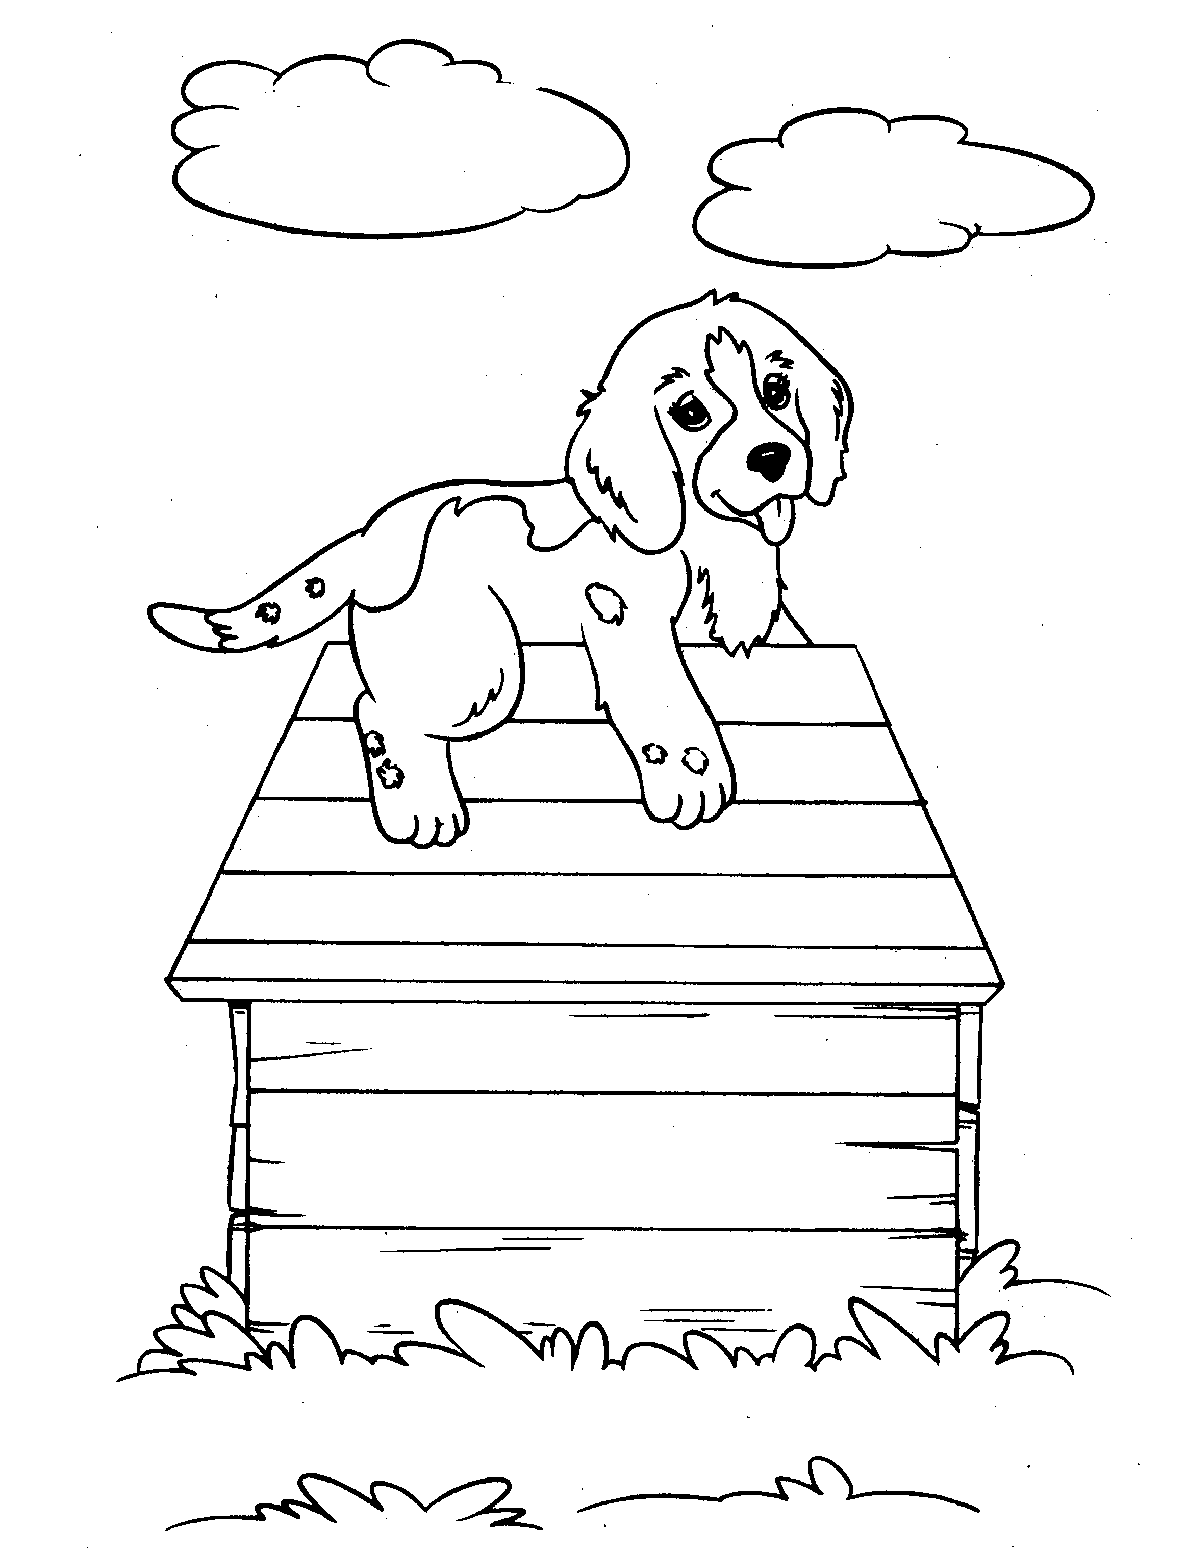 770 Top Dog Printable Coloring Pages  Images